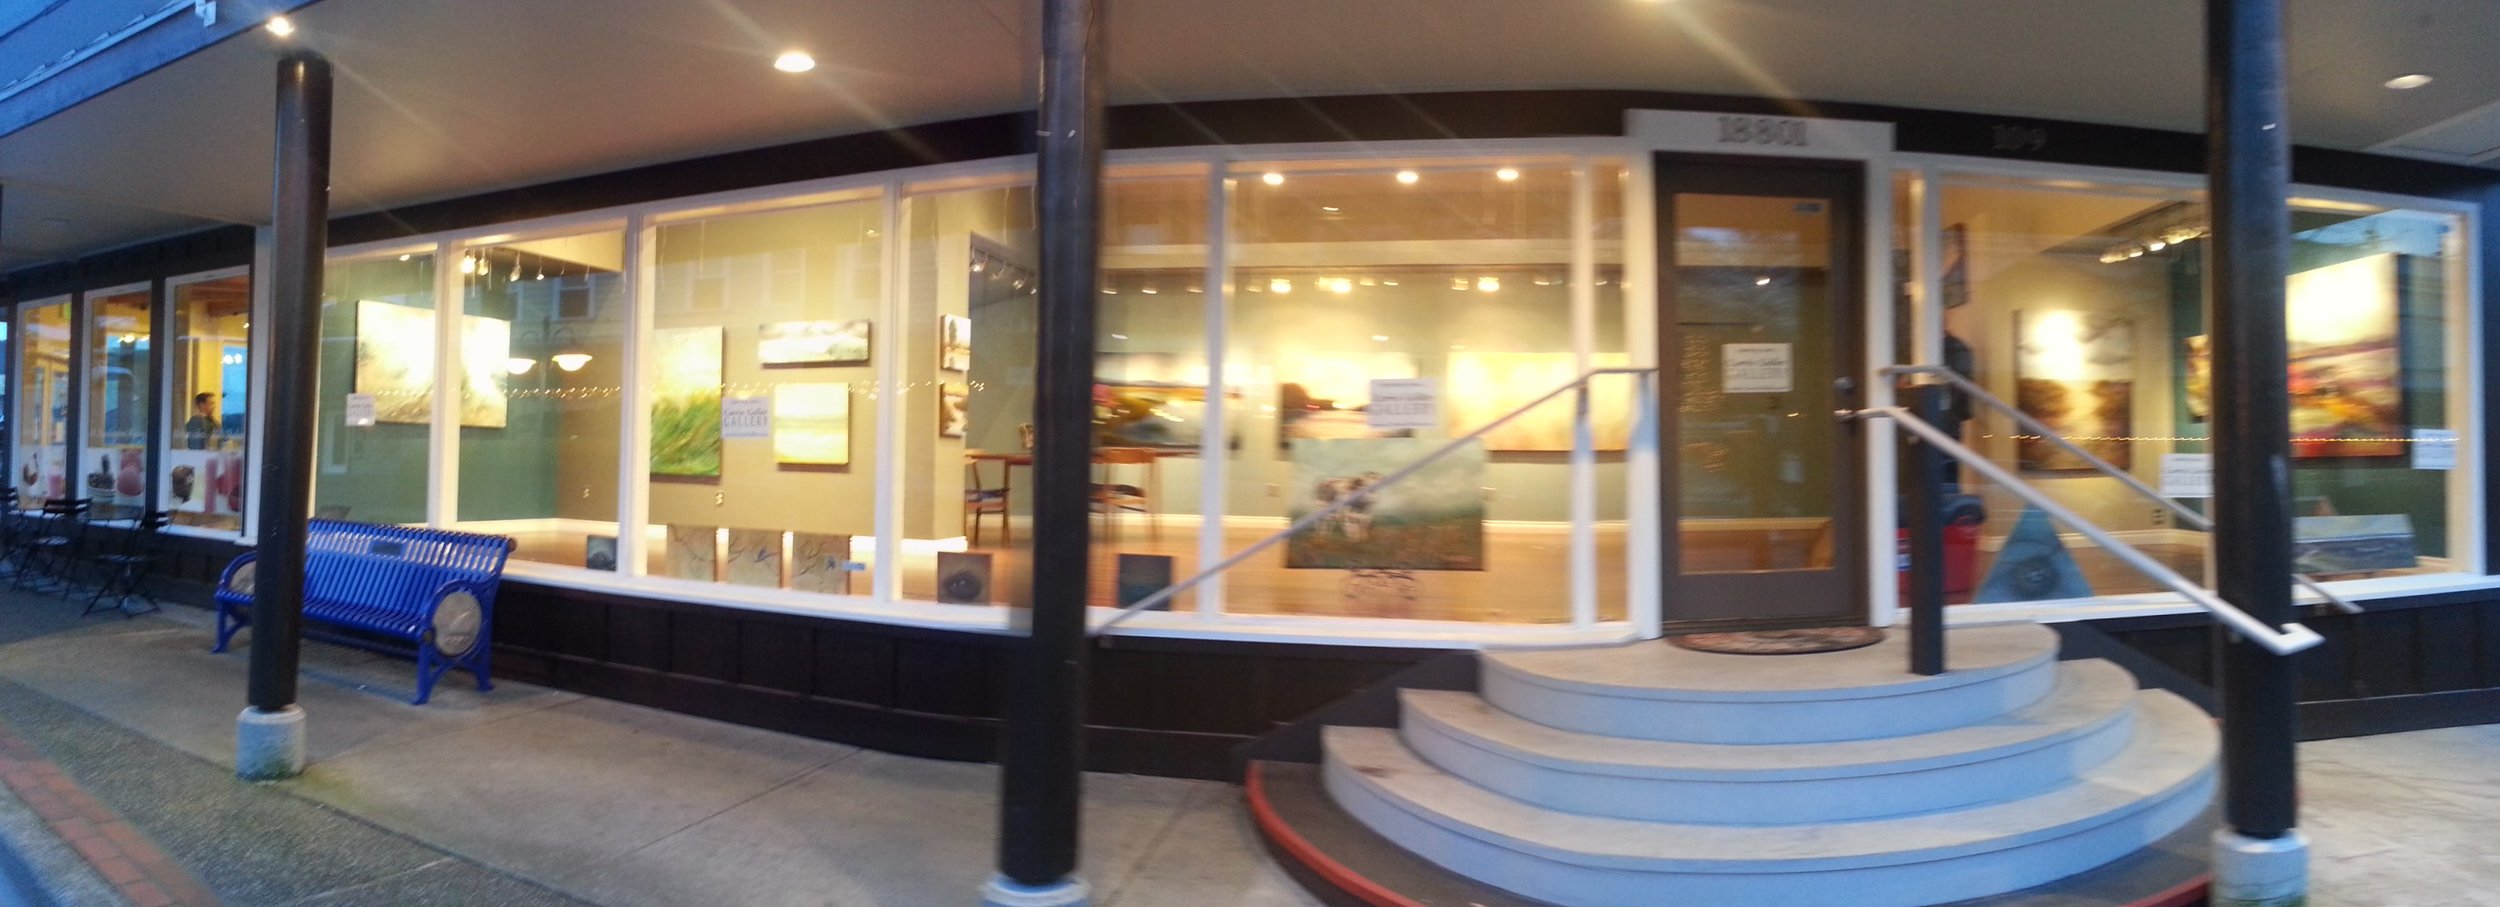  Entrance to Carrie Goller Gallery, Poulsbo 